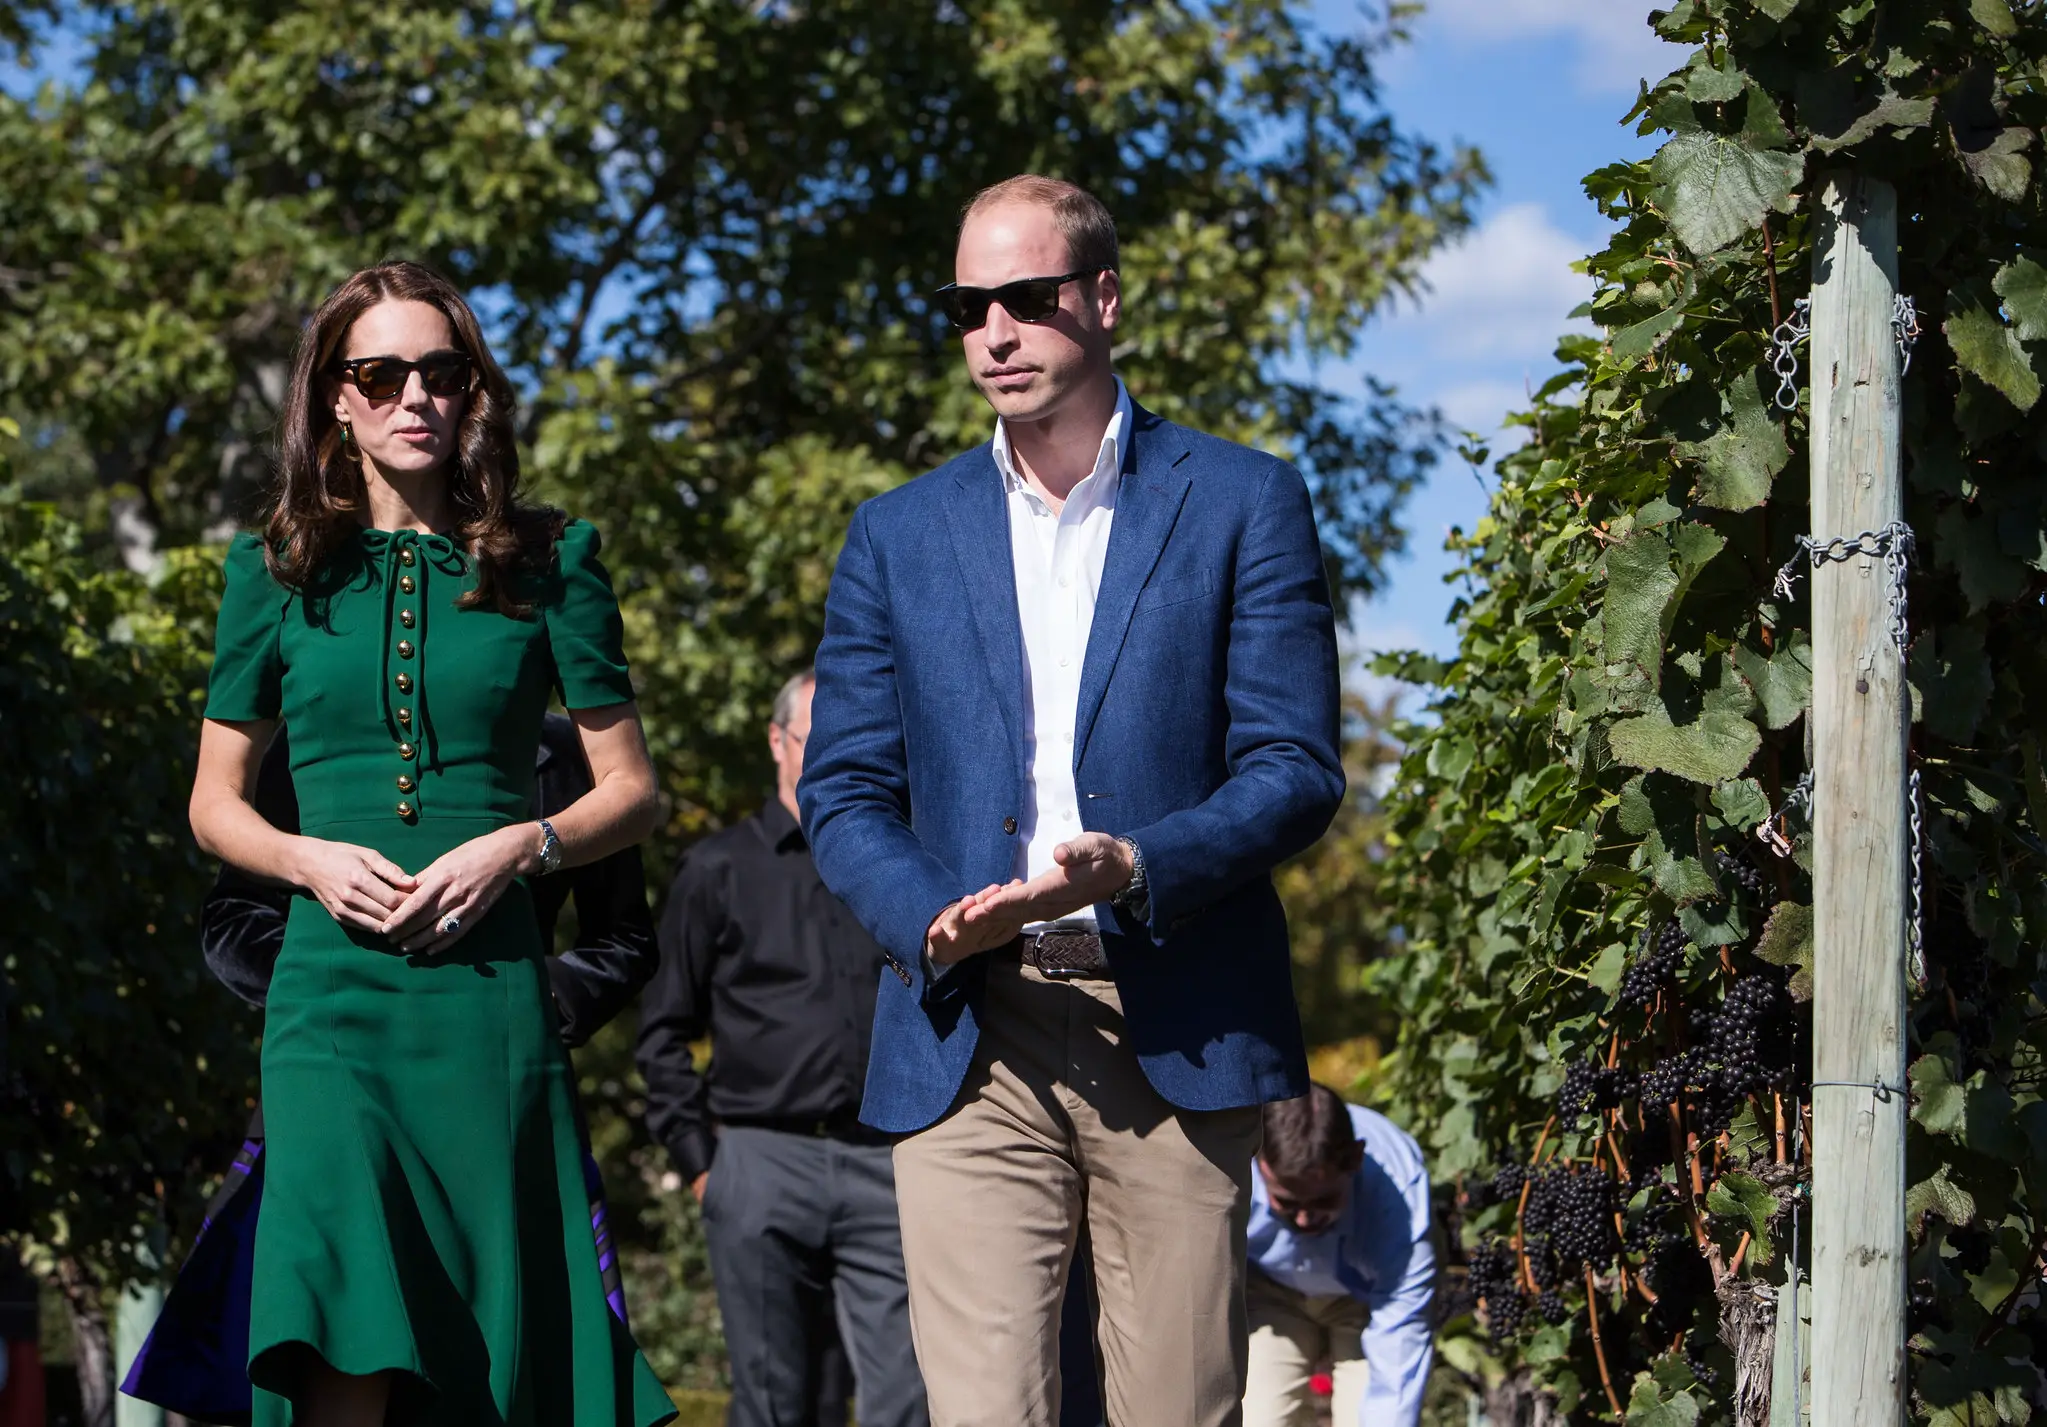 The Duke and Duchess of Cambridge visited Kelowna in 2016